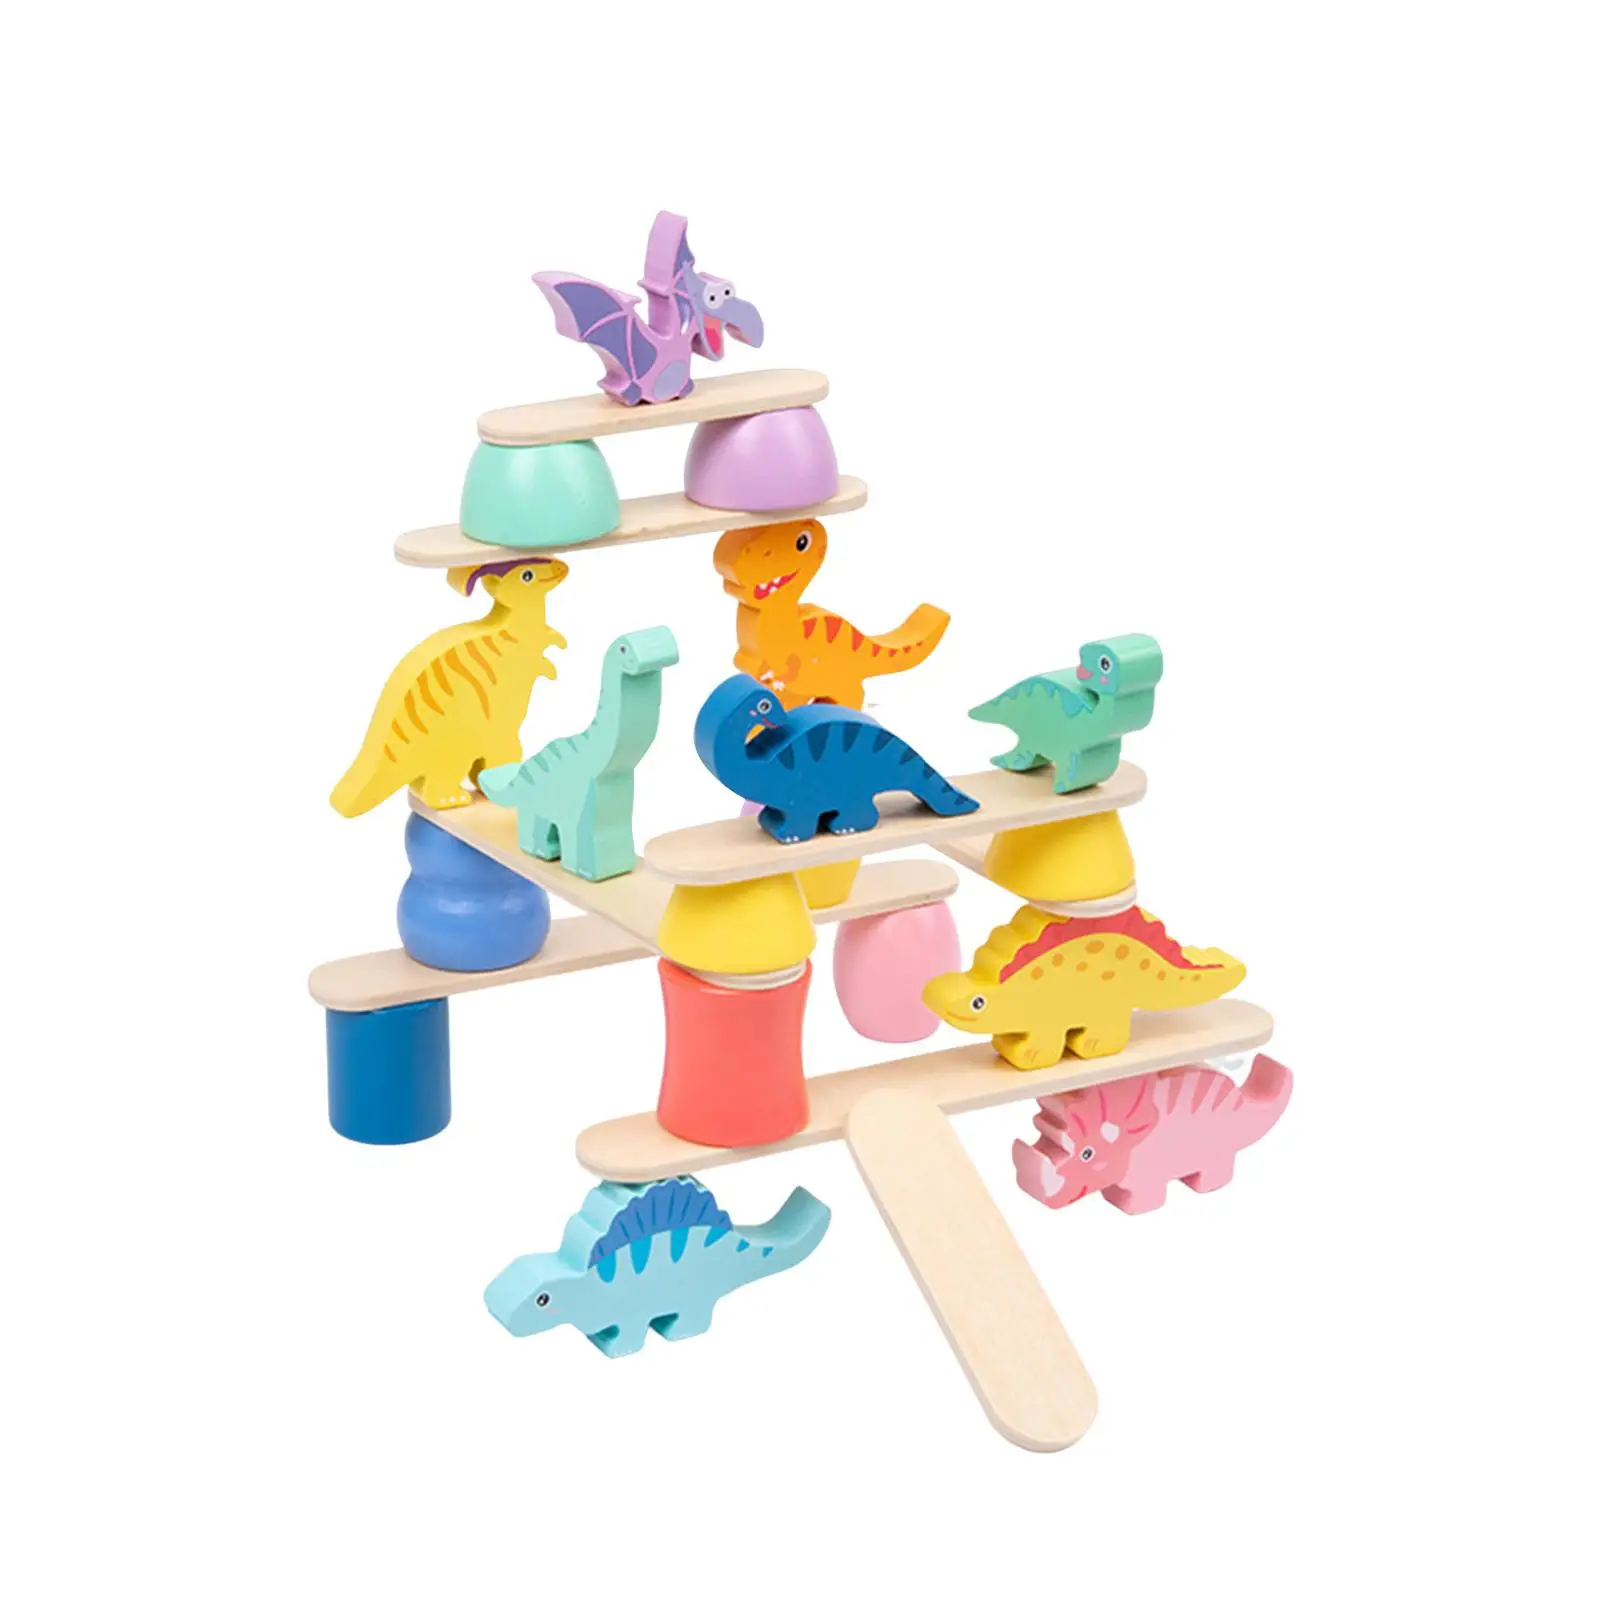 Sorting Skill Developing Intelligence Play Kits Wooden Dinosaur Stacking Balancing Block Puzzle Game for Toddlers Children Gifts